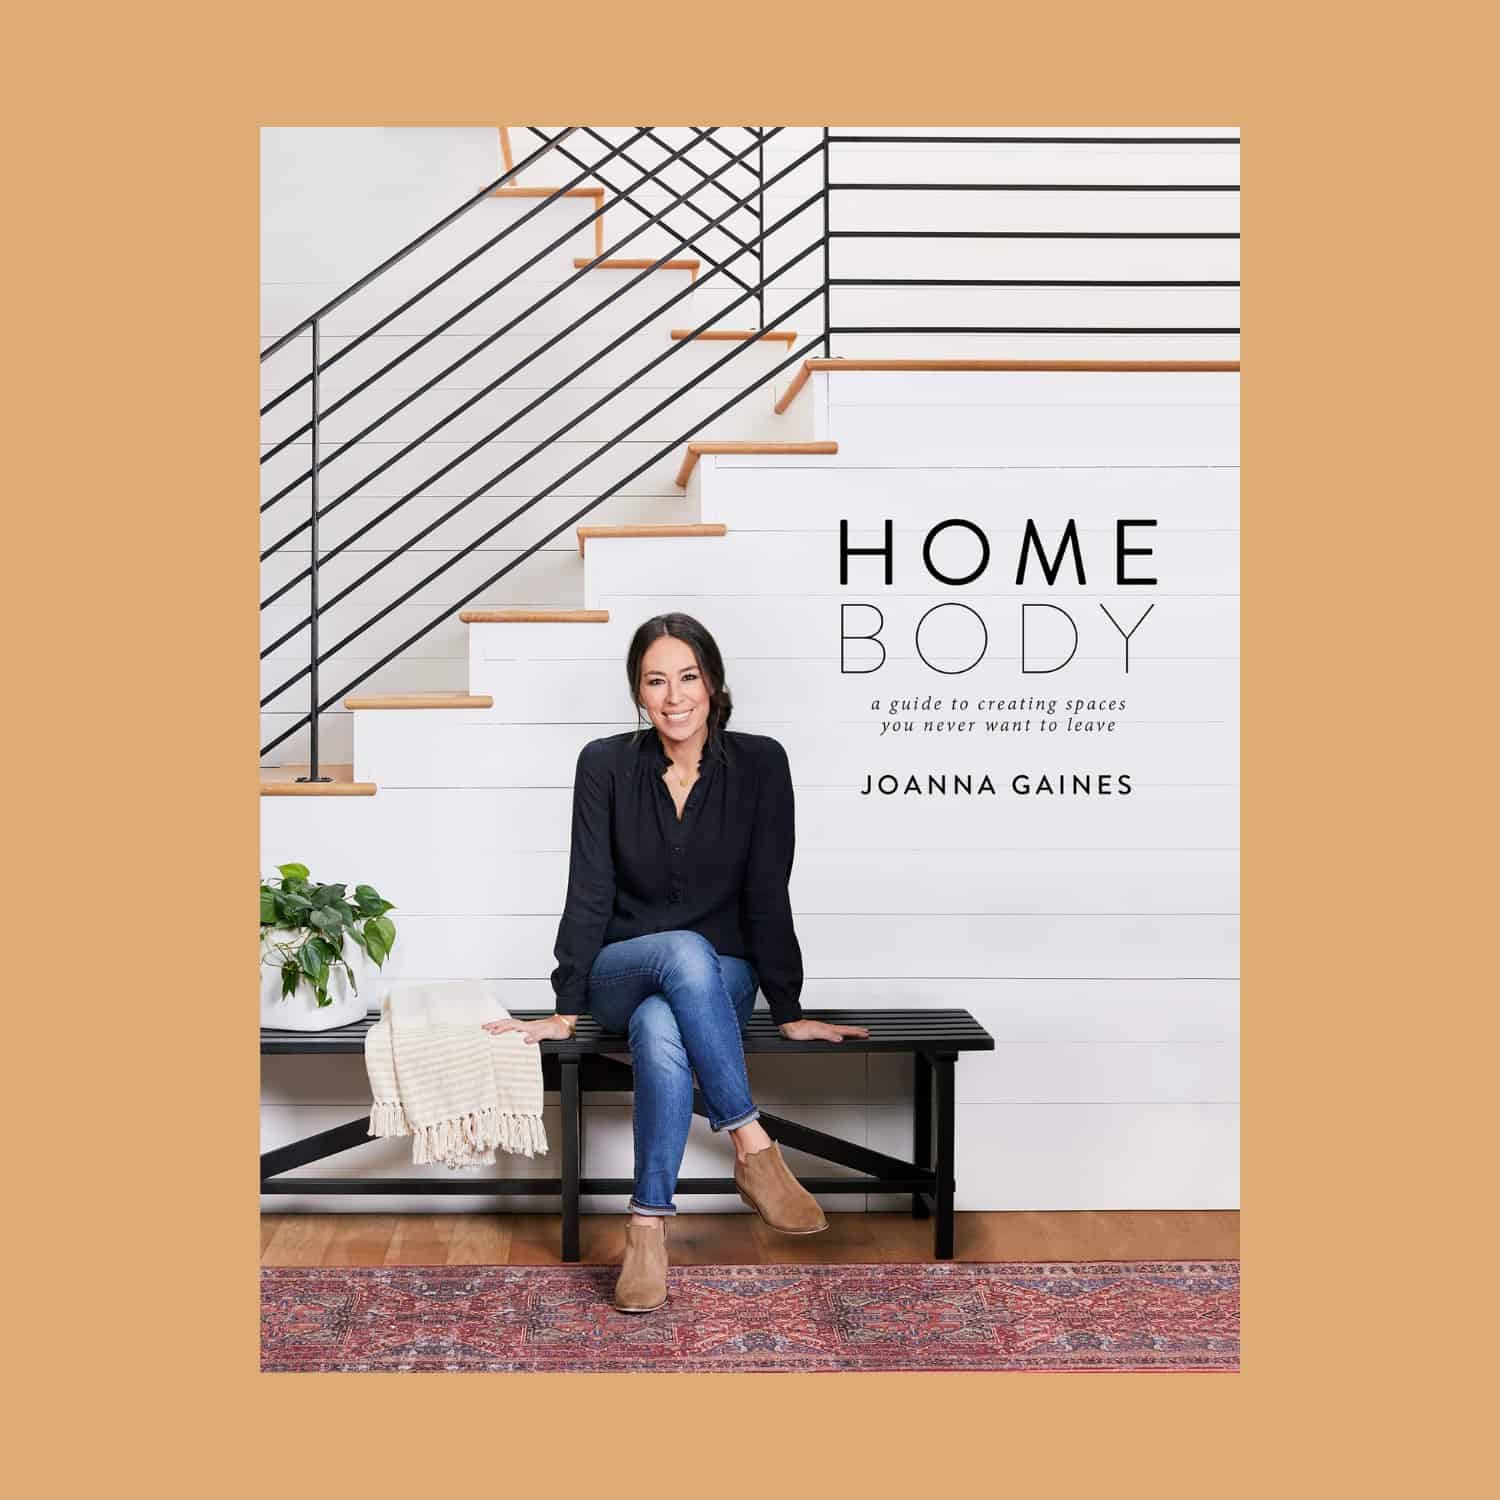 Best home decor coffee table books to style your home or give as a gift.